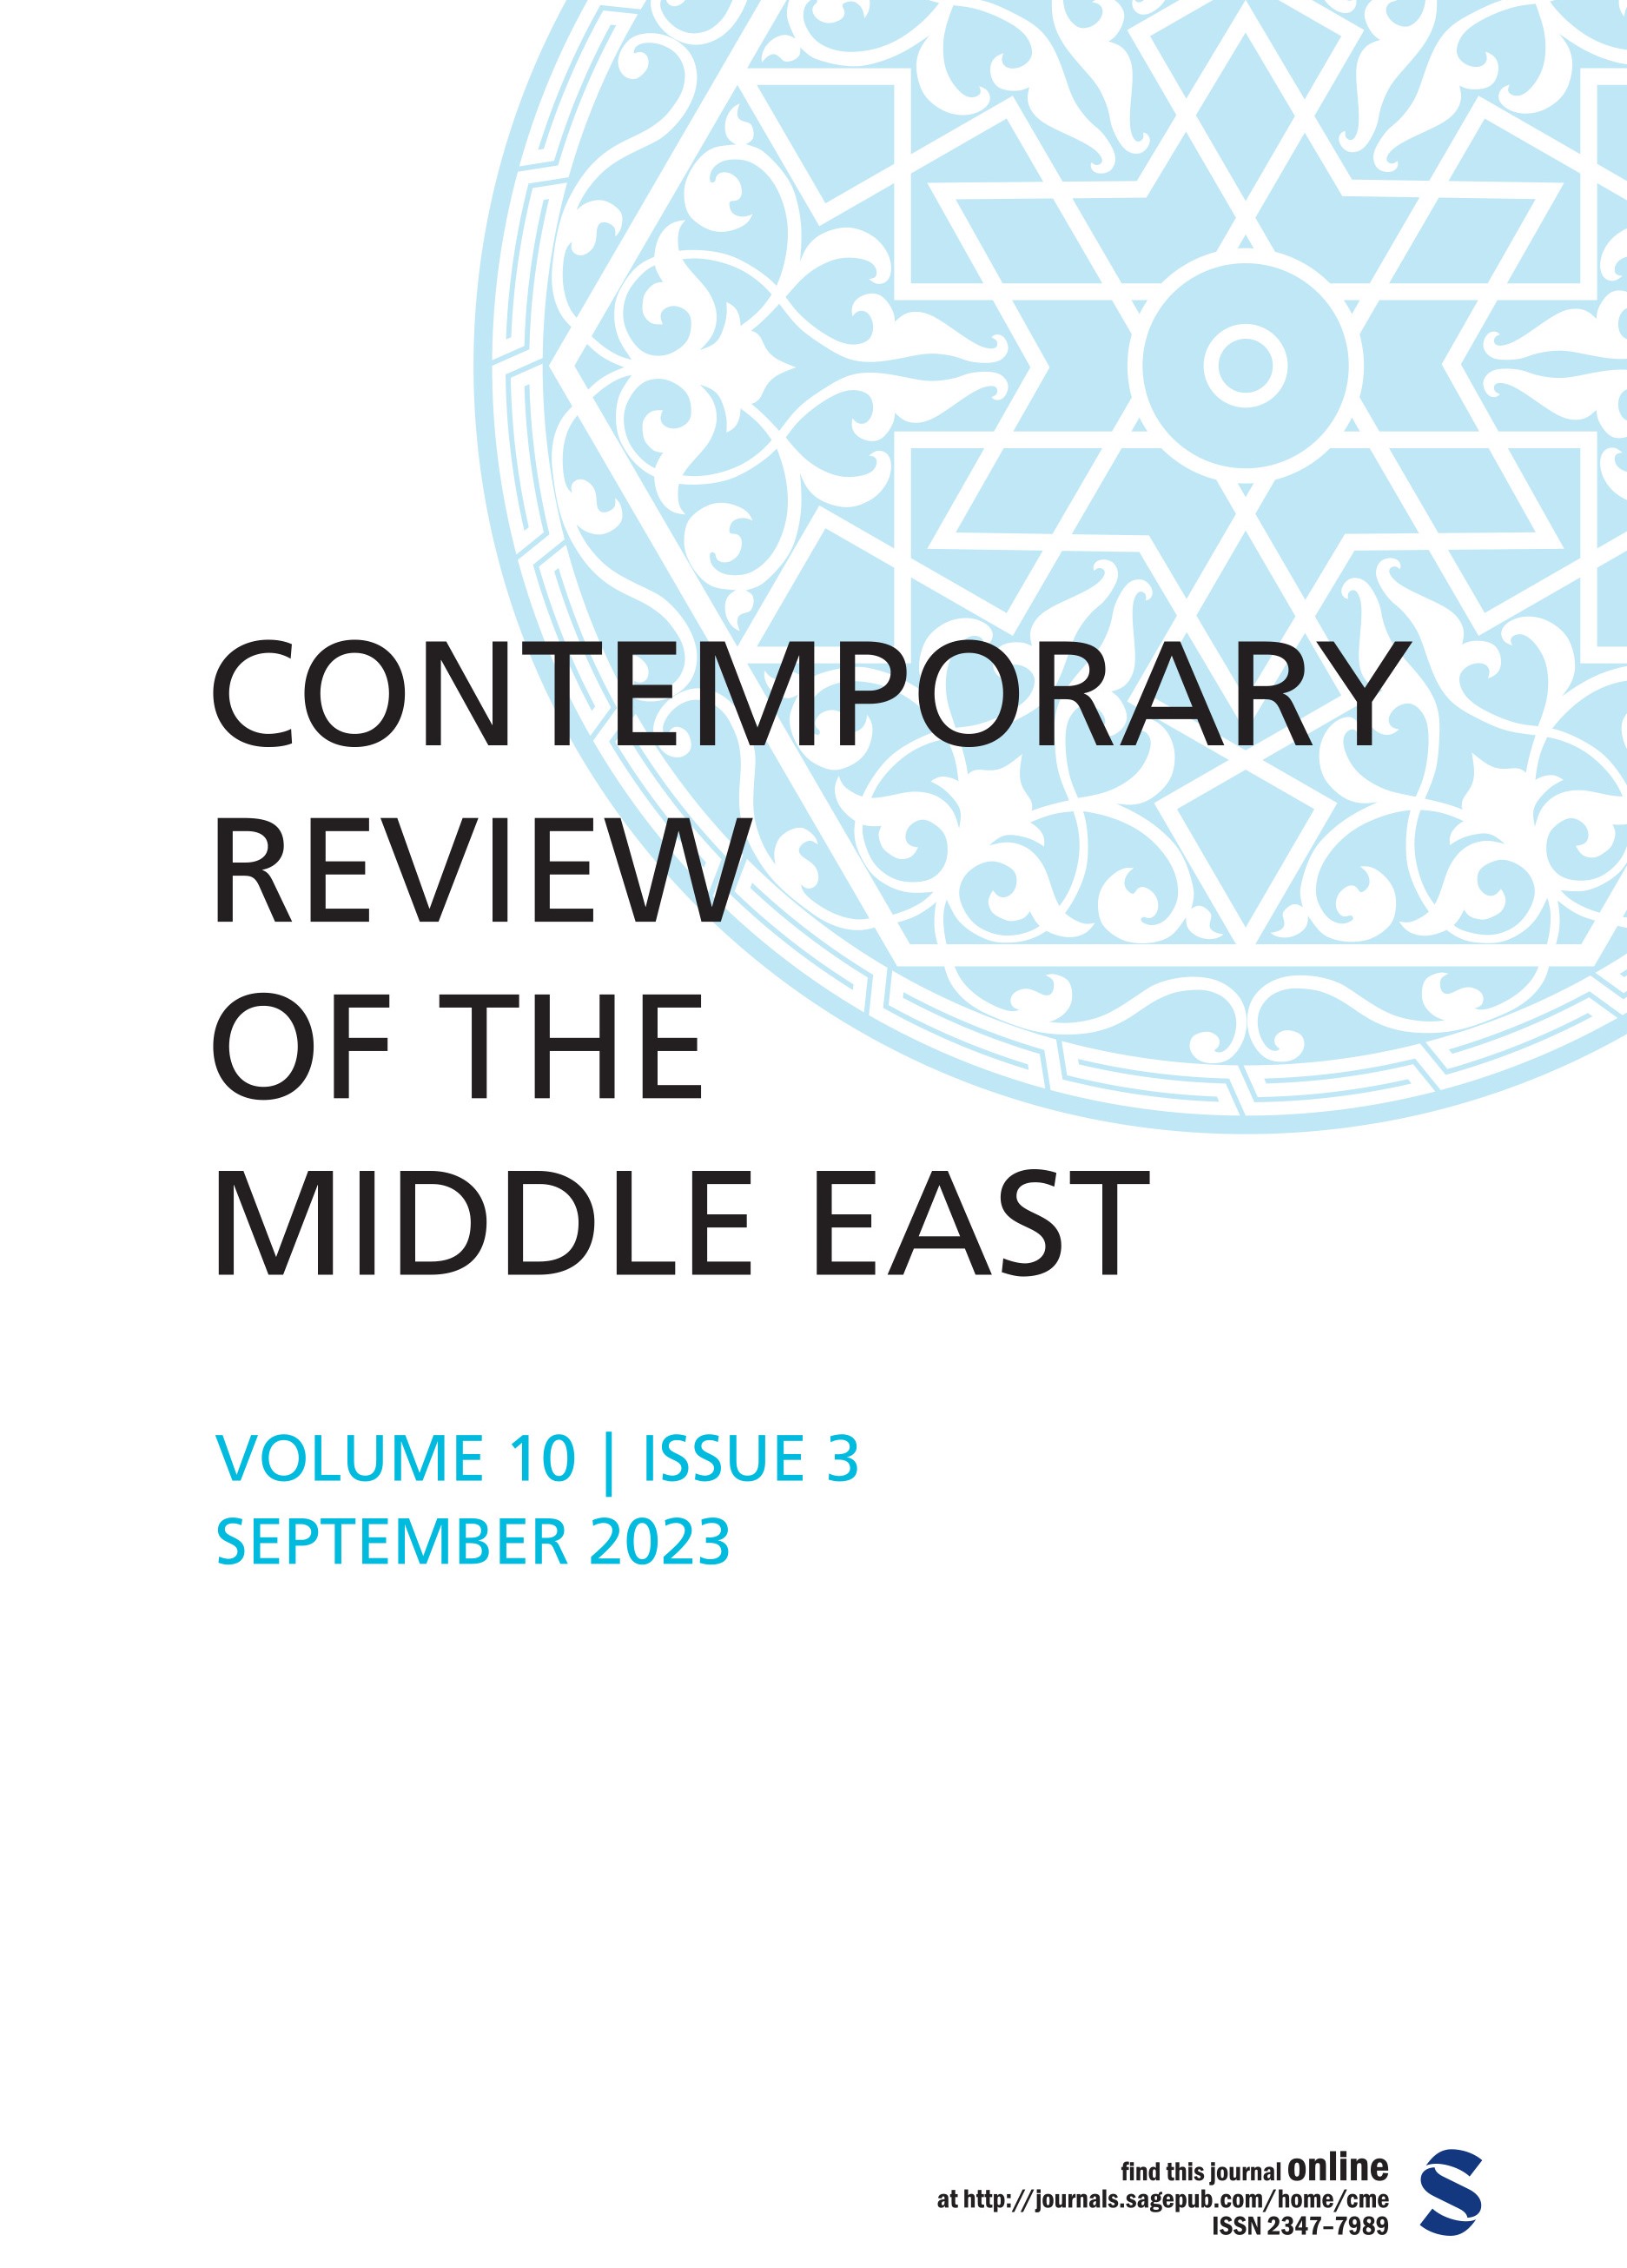 Contemporary Review of the Middle East Volume 10 Issue 3, September 2023: Articles